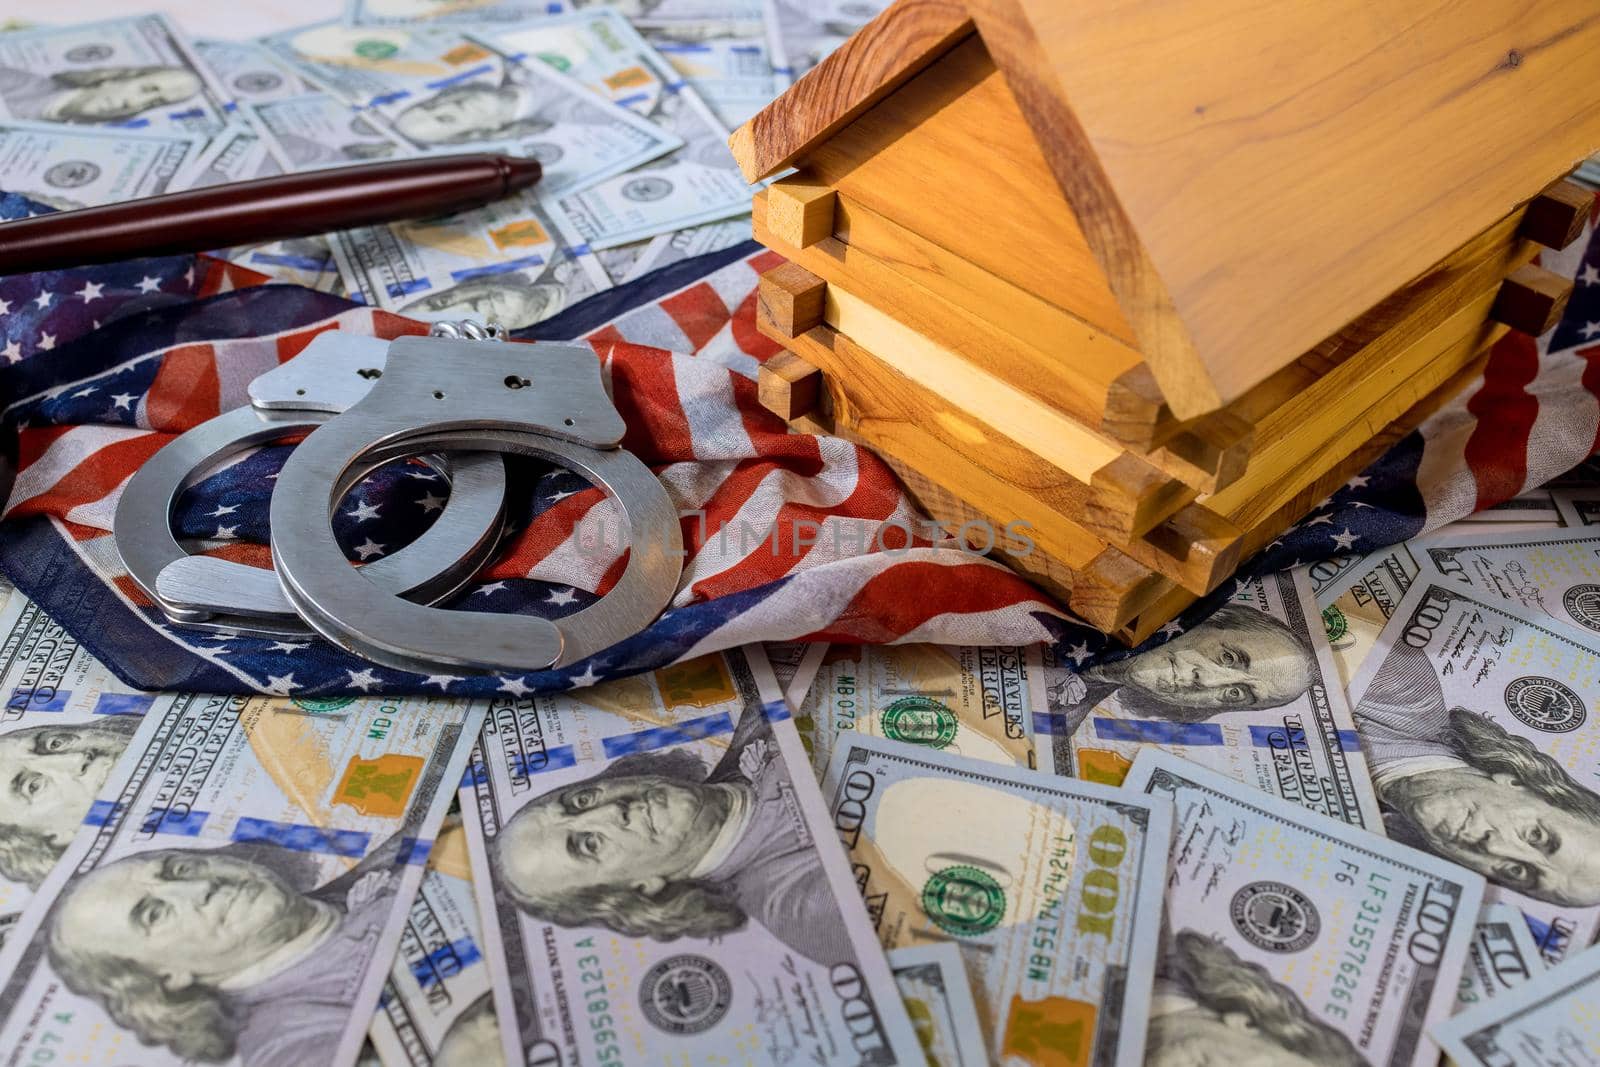 American court imposed an arrest to on house of the sanctions property with US dollars banknotes handcuffs Judge gavel